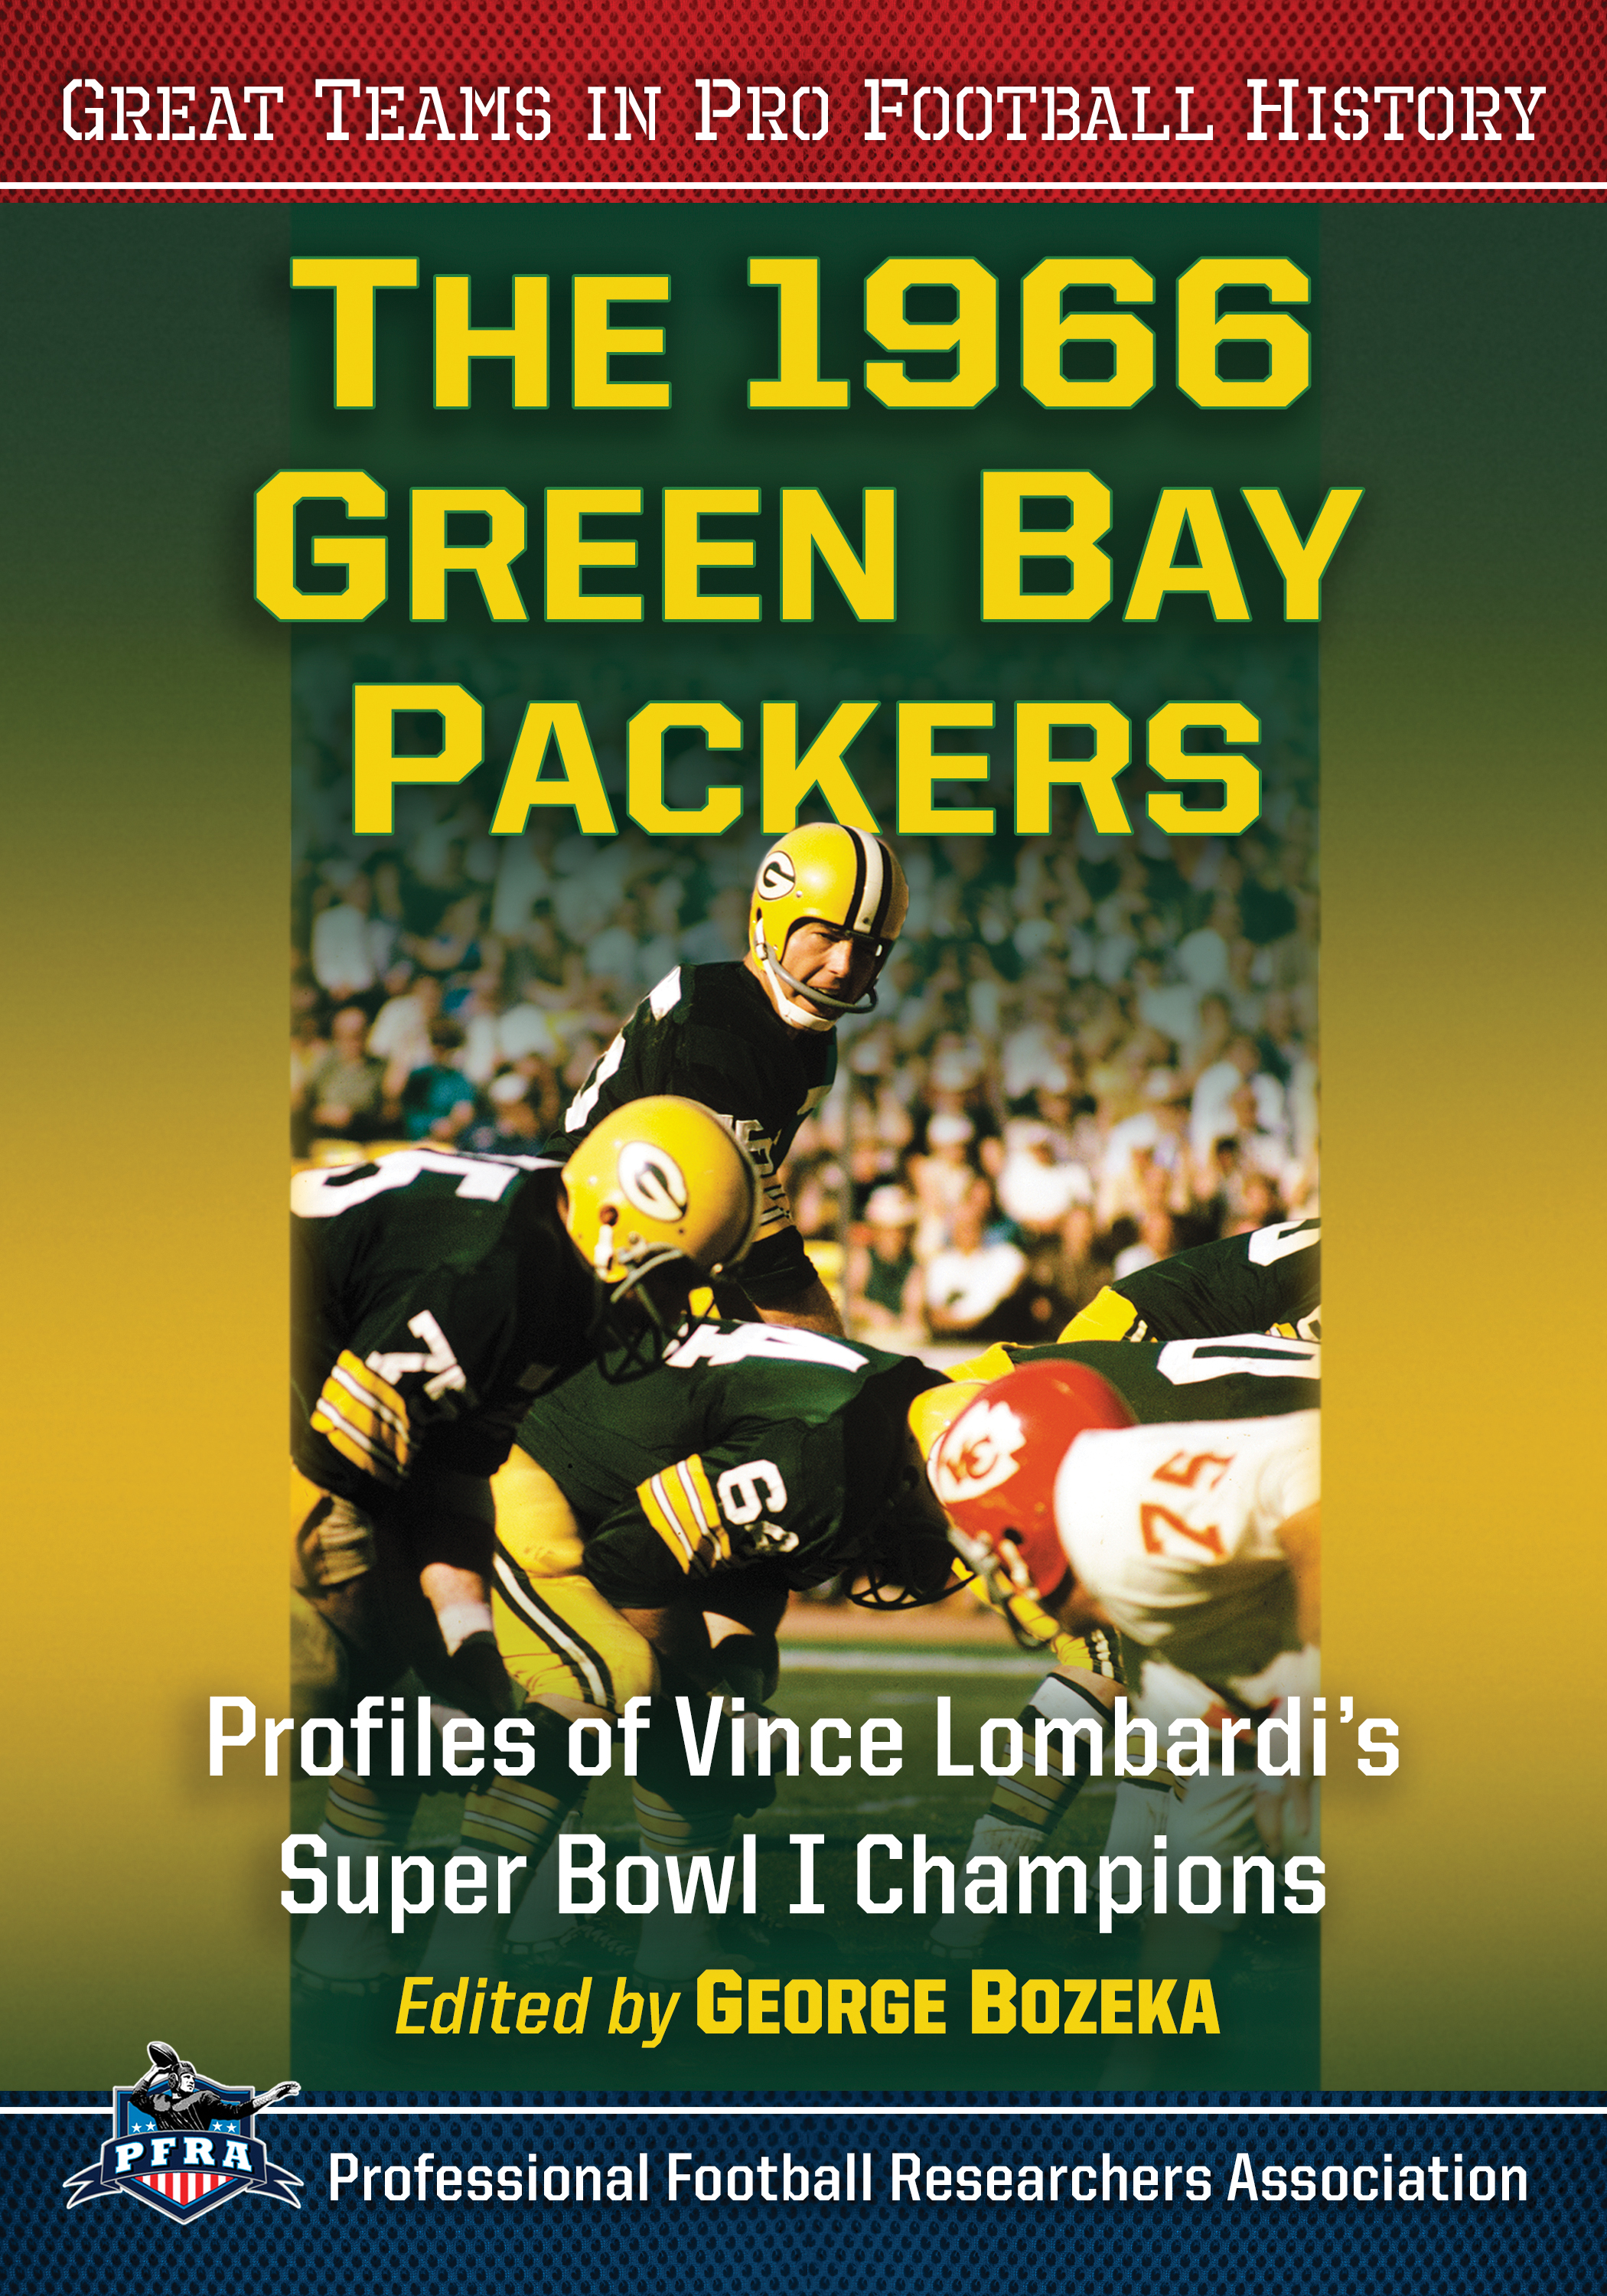 The 1966 Green Bay Packers Profiles of Vince Lombardis Super Bowl I Champions - photo 1